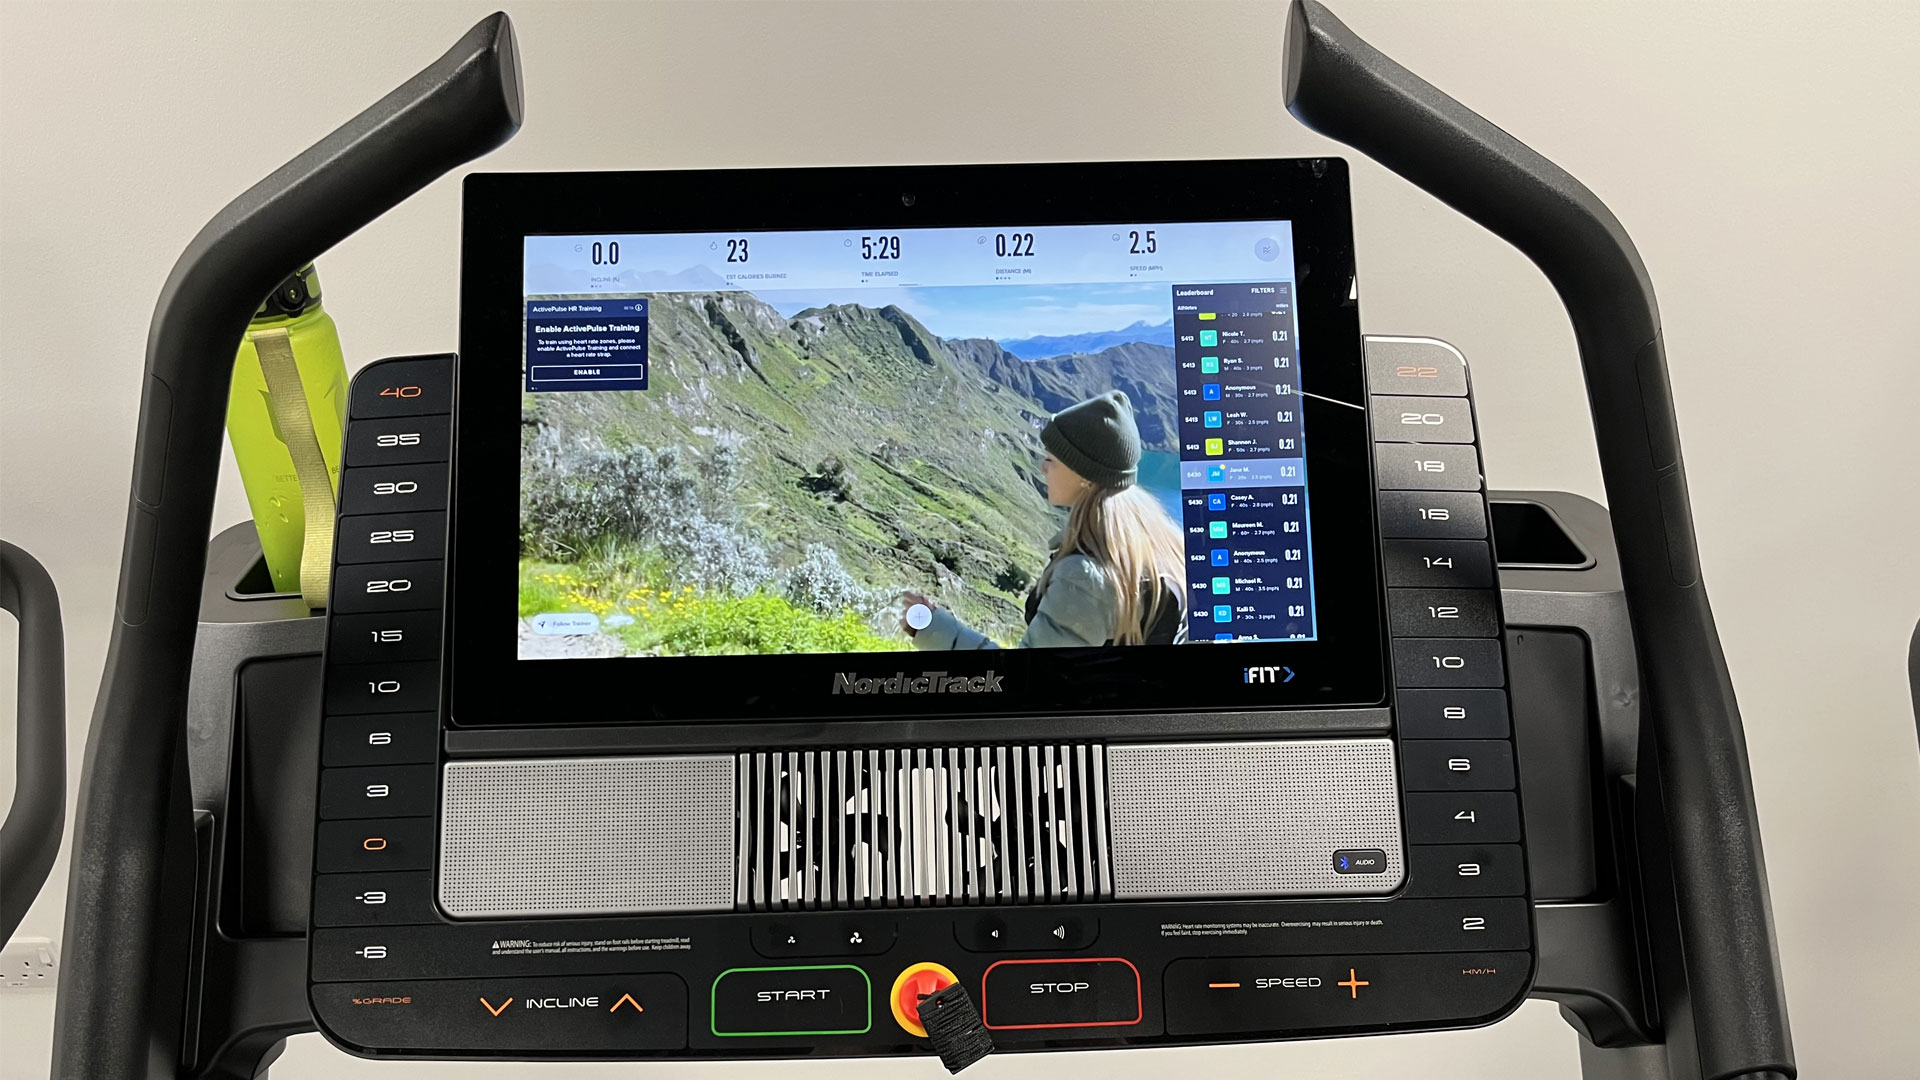 NordicTrack Commercial 2950 review: image shows NordicTrack Commercial 2950 treadmill display